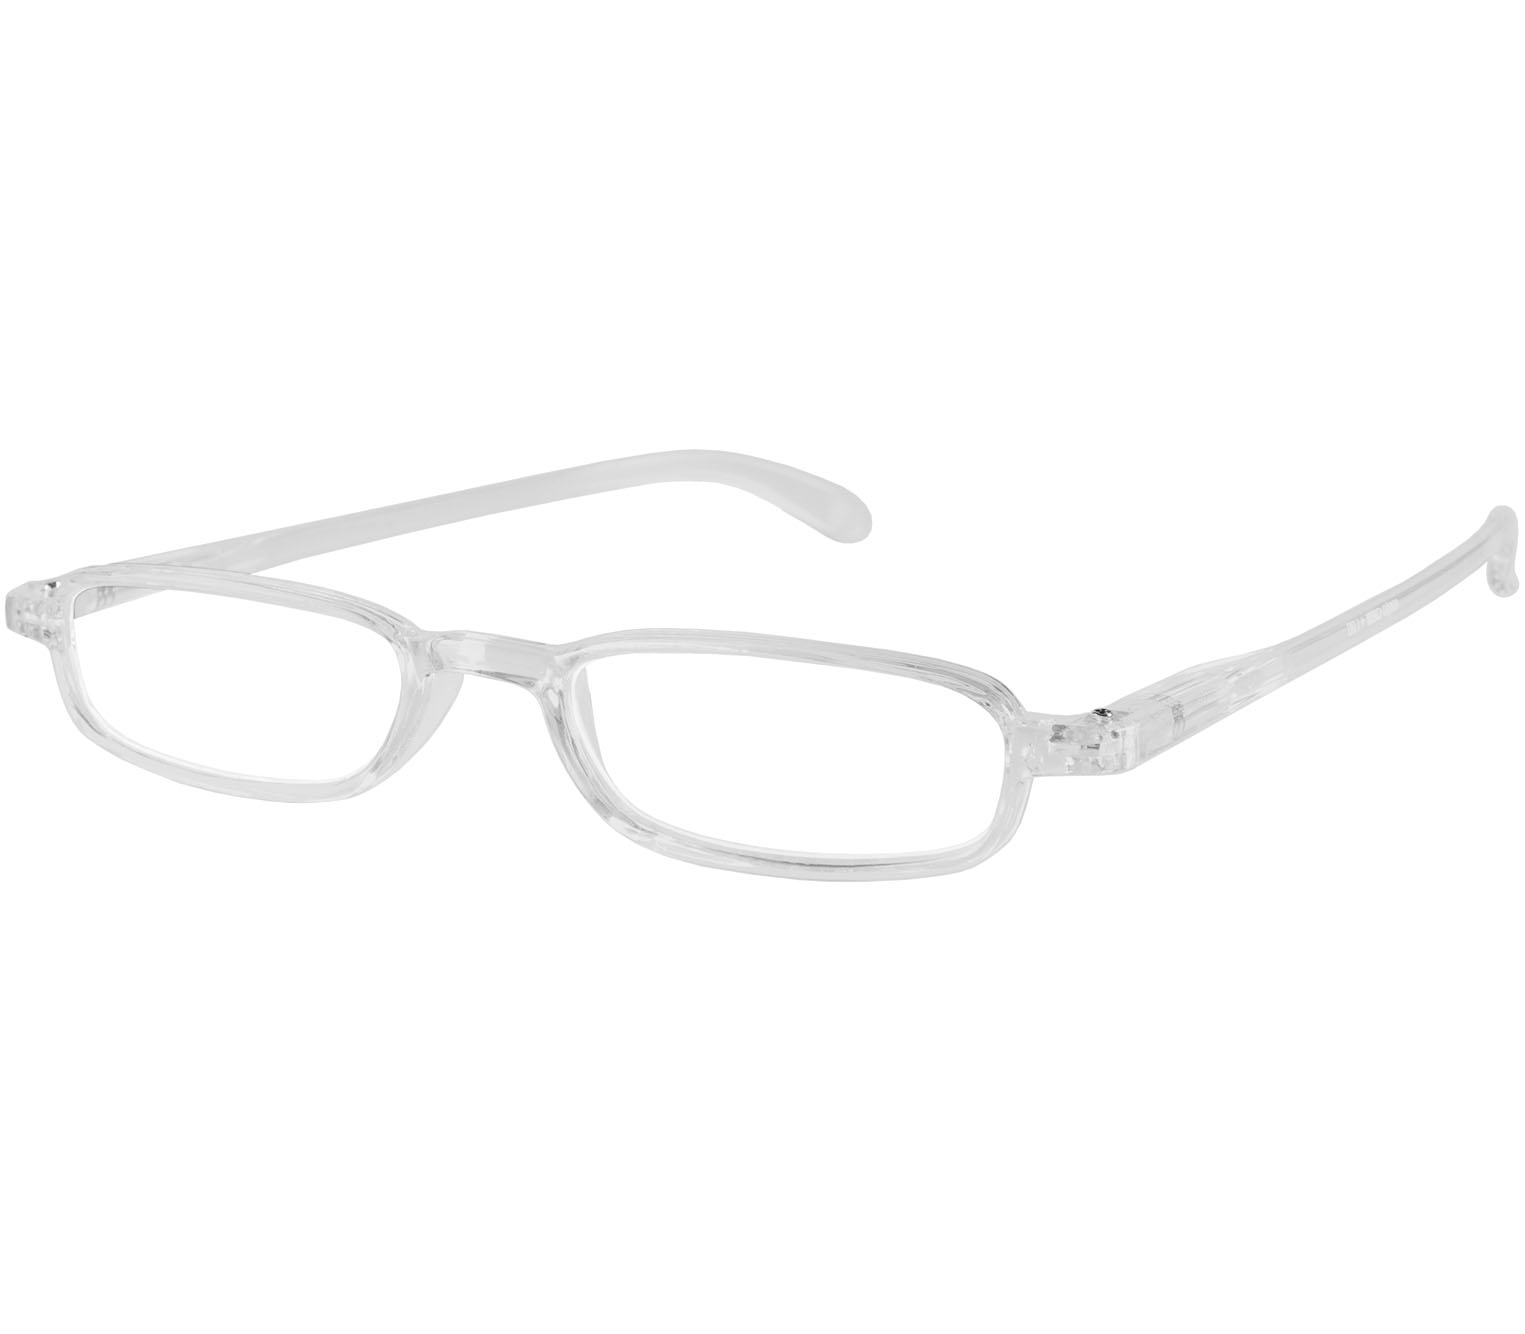 Main Image (Angle) - Tokyo (Clear) Reading Glasses